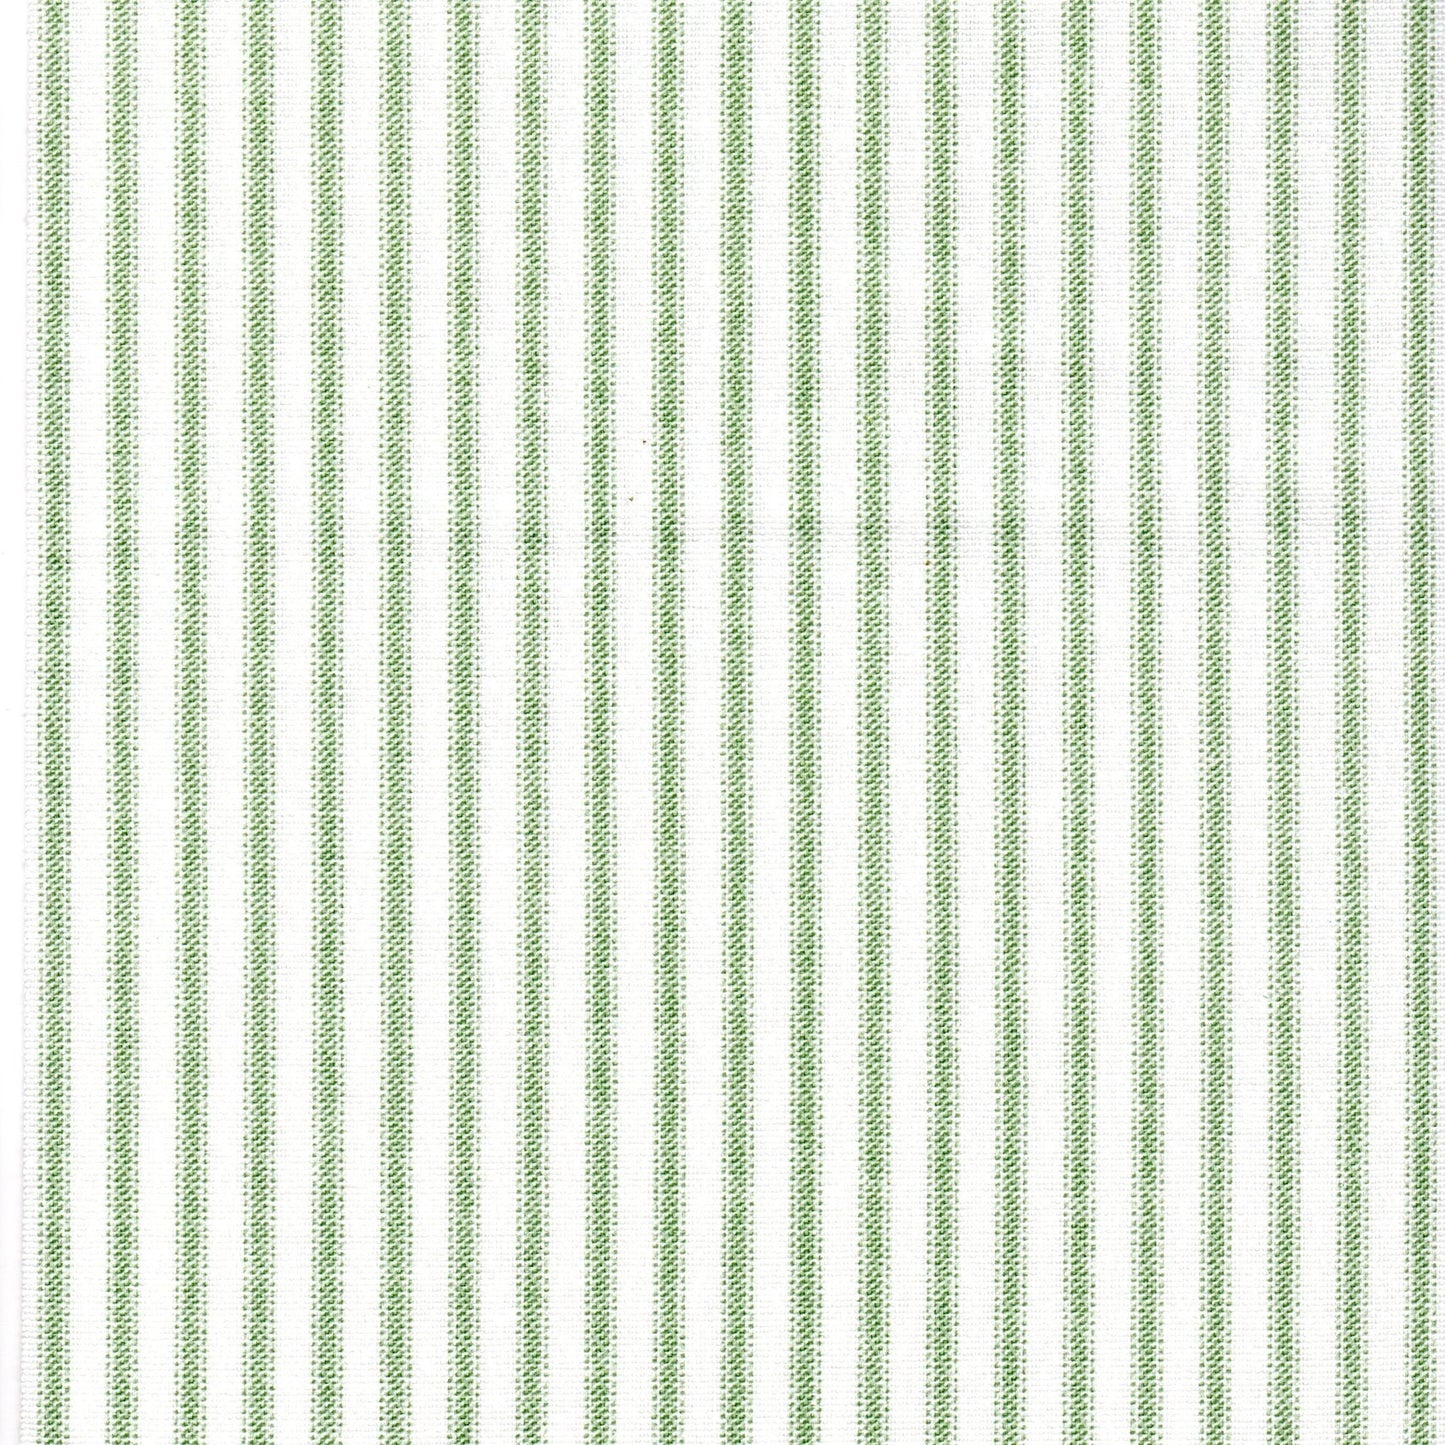 empress swag valance in Classic Sage Green Ticking Stripe on White